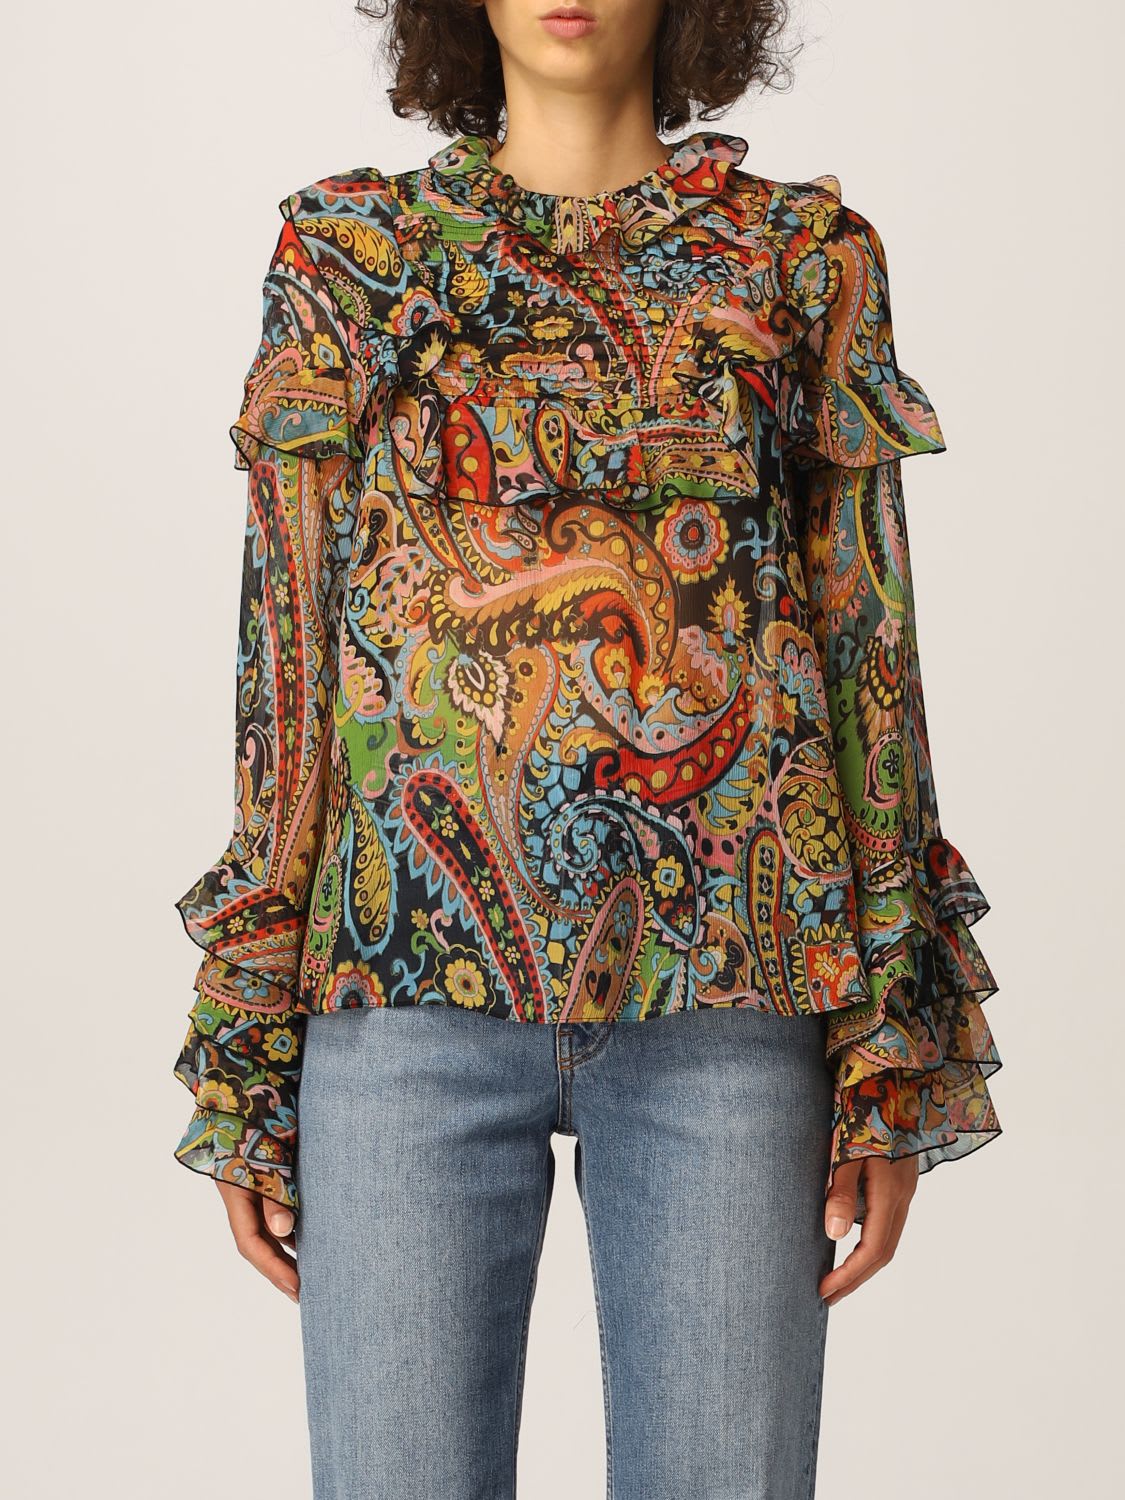 Etro Top Etro Blouse In Silk Crepon With Paisley Pattern